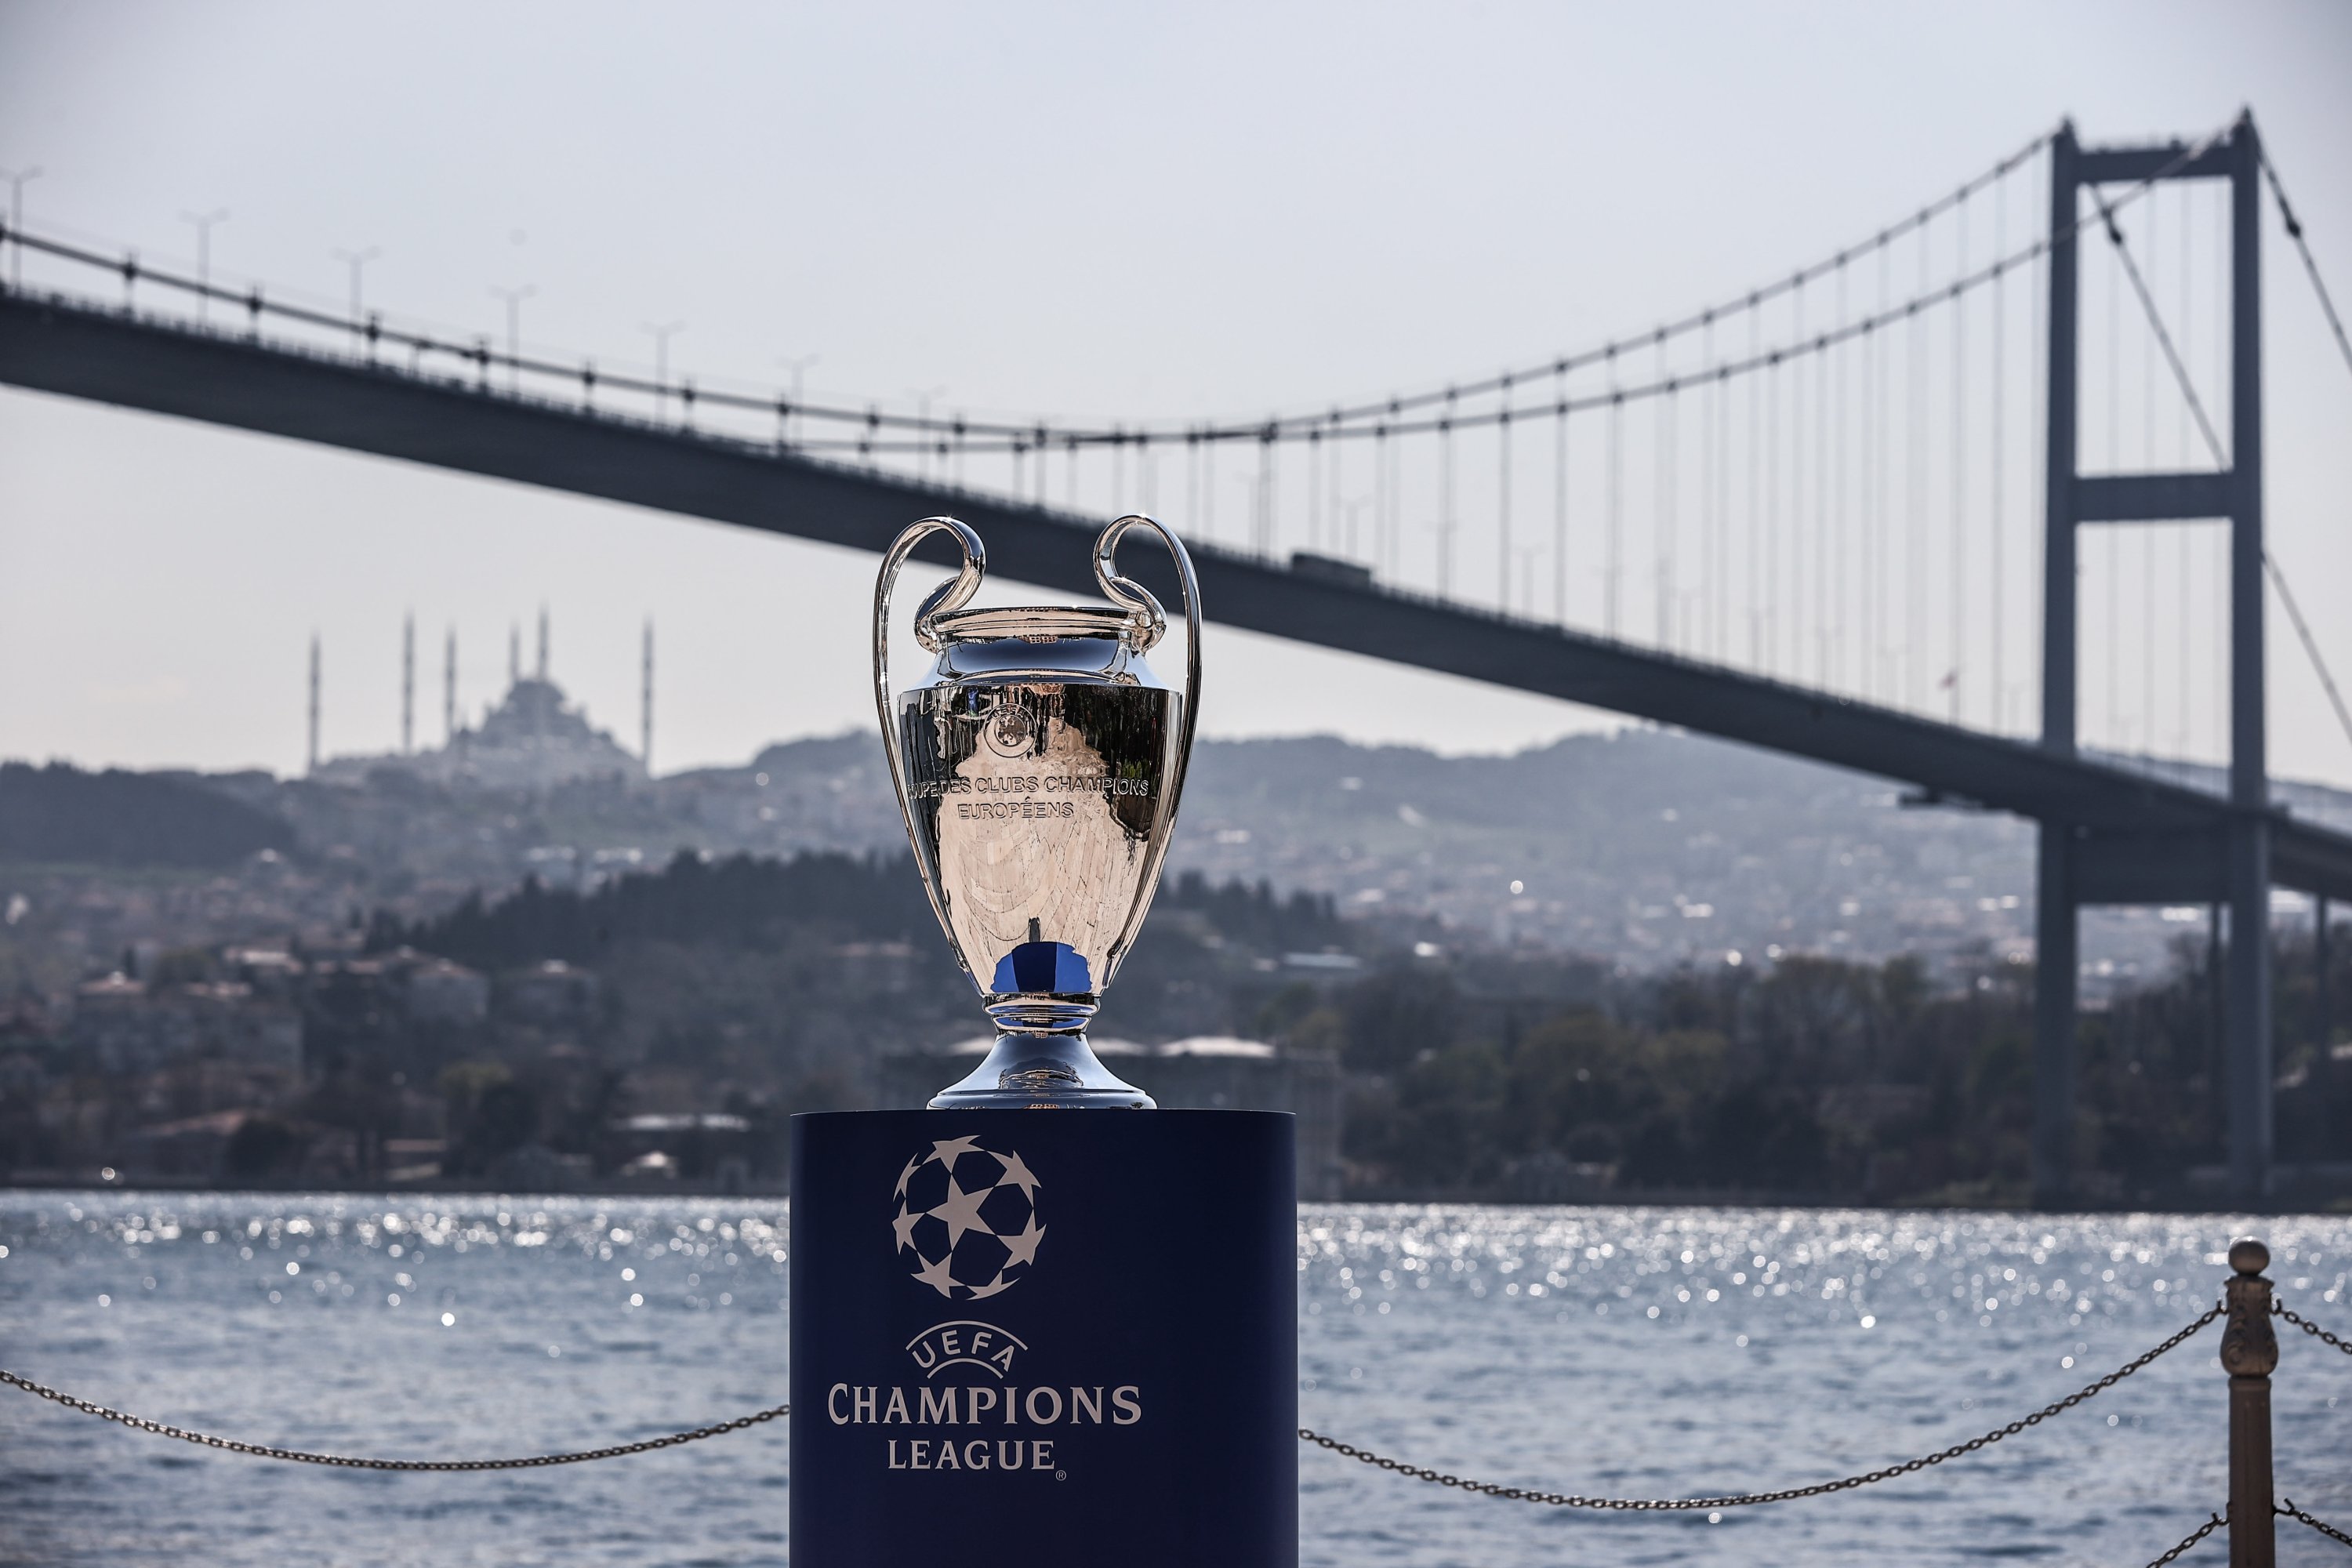 UEFA Champions League trophy arrives in Istanbul ahead of final | Daily  Sabah